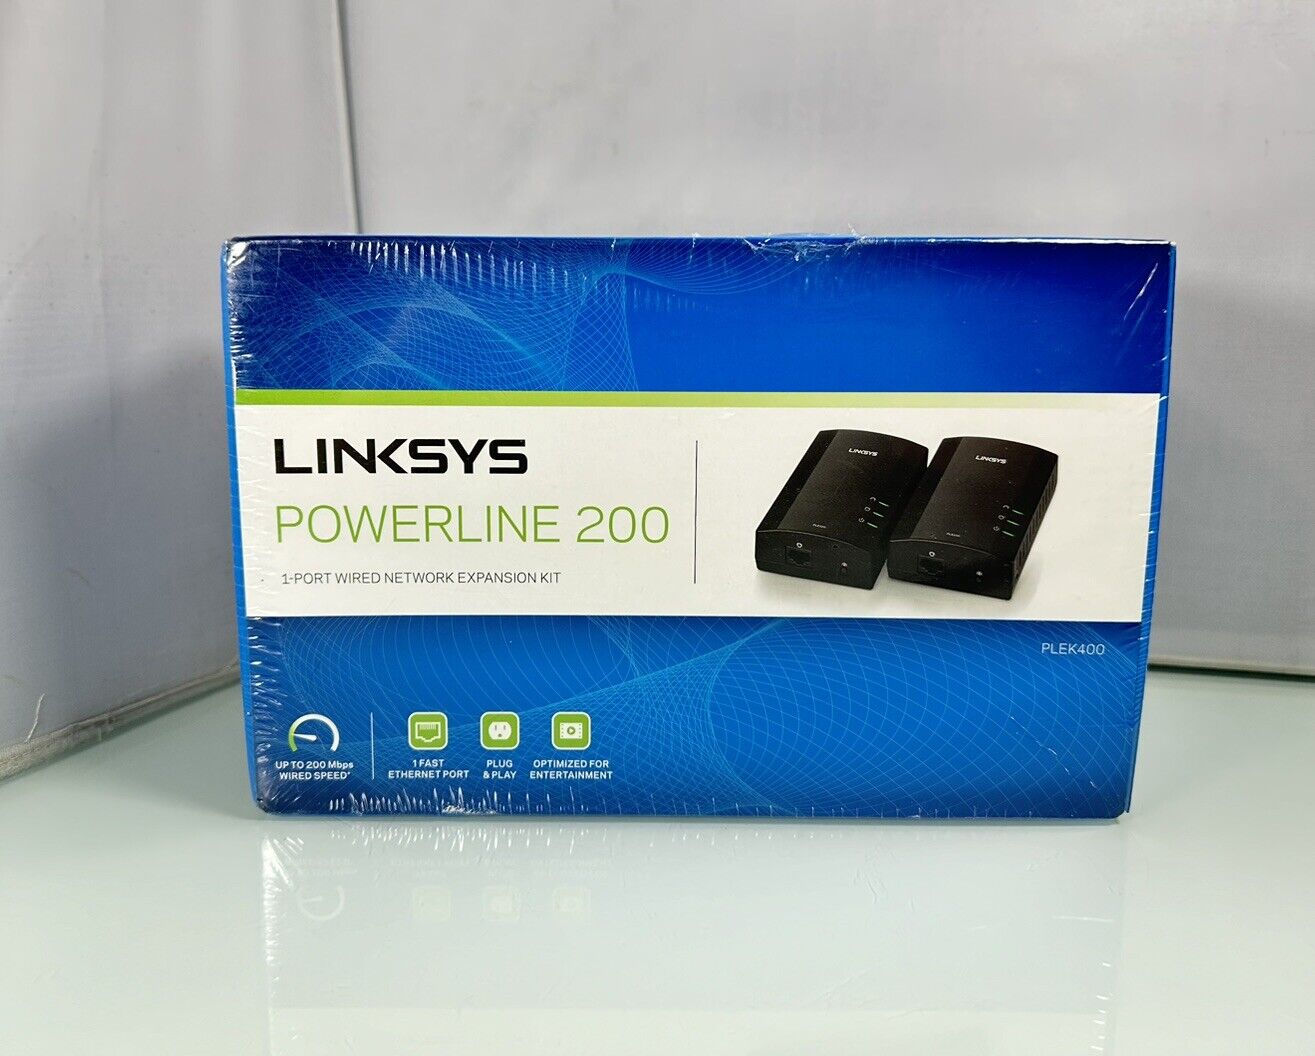 NEW Linksys Powerline 200 3-Port Wired Network Expansion Kit (PLEK400-NP) SEALED